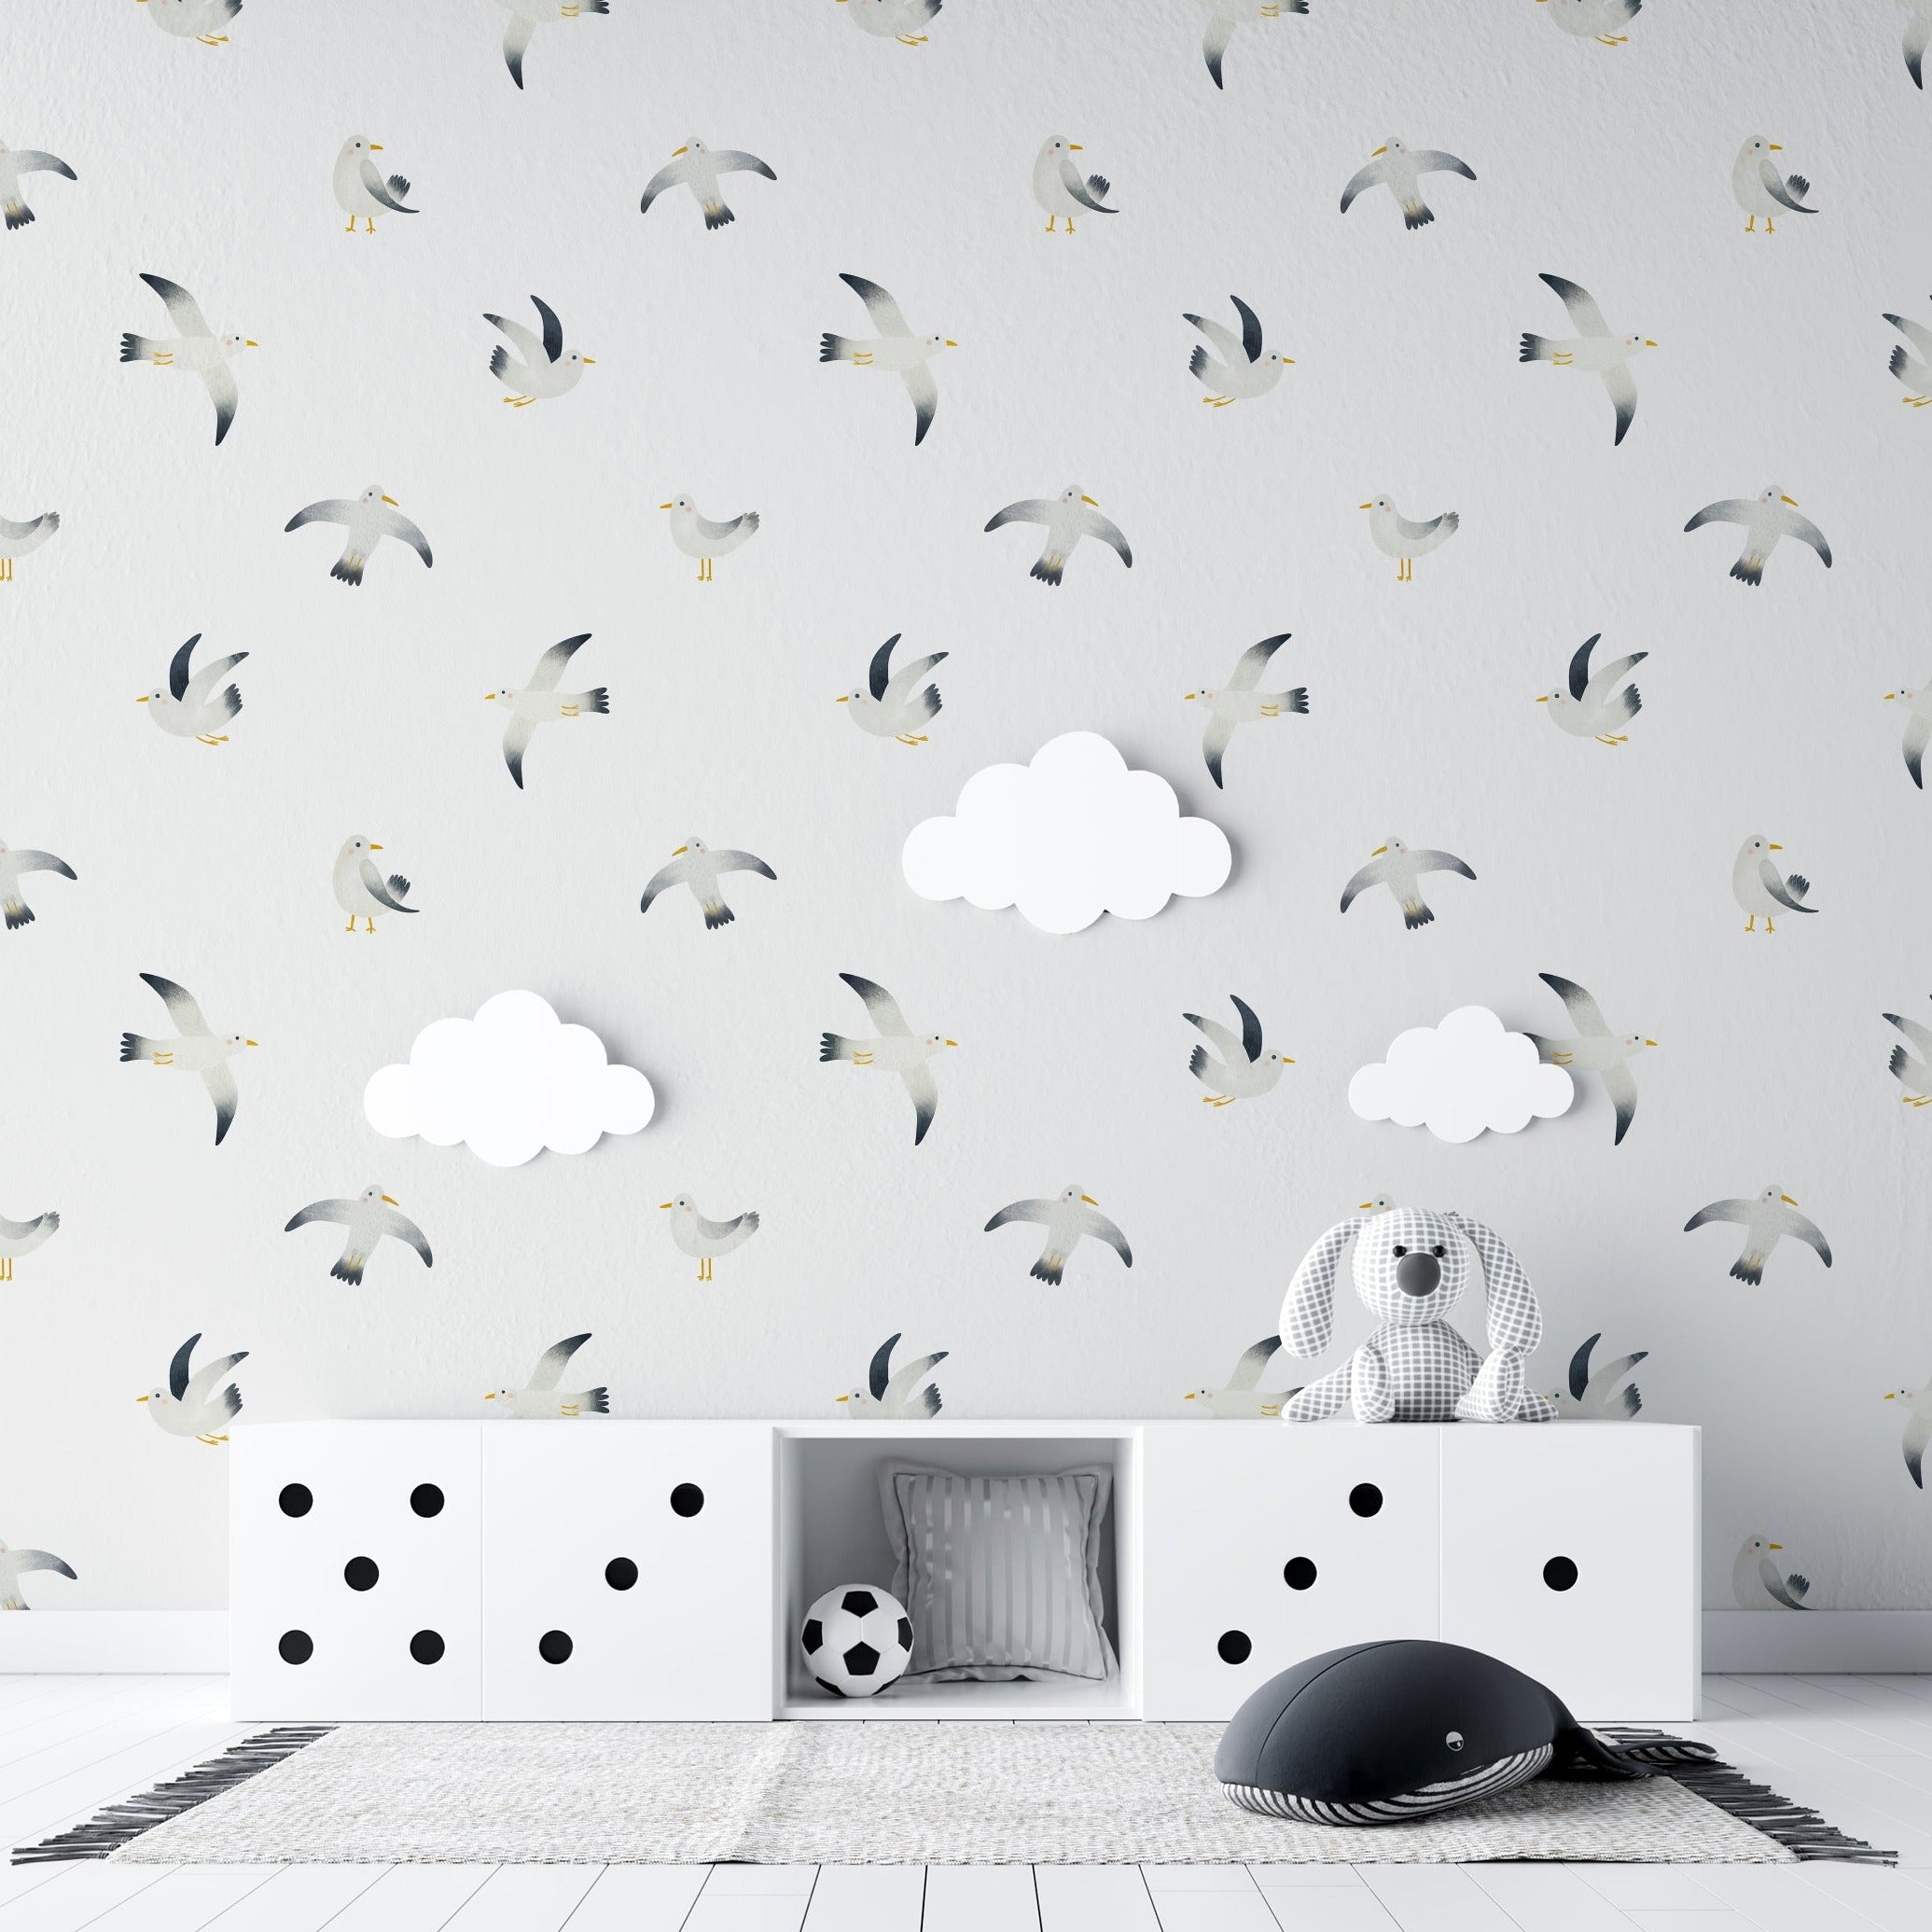 A playful setting in a child’s room featuring the Birds By the Sea Wallpaper. The room is furnished with a white storage unit adorned with black polka dots and fluffy white clouds hanging on the walls, complementing the flying seagull pattern.